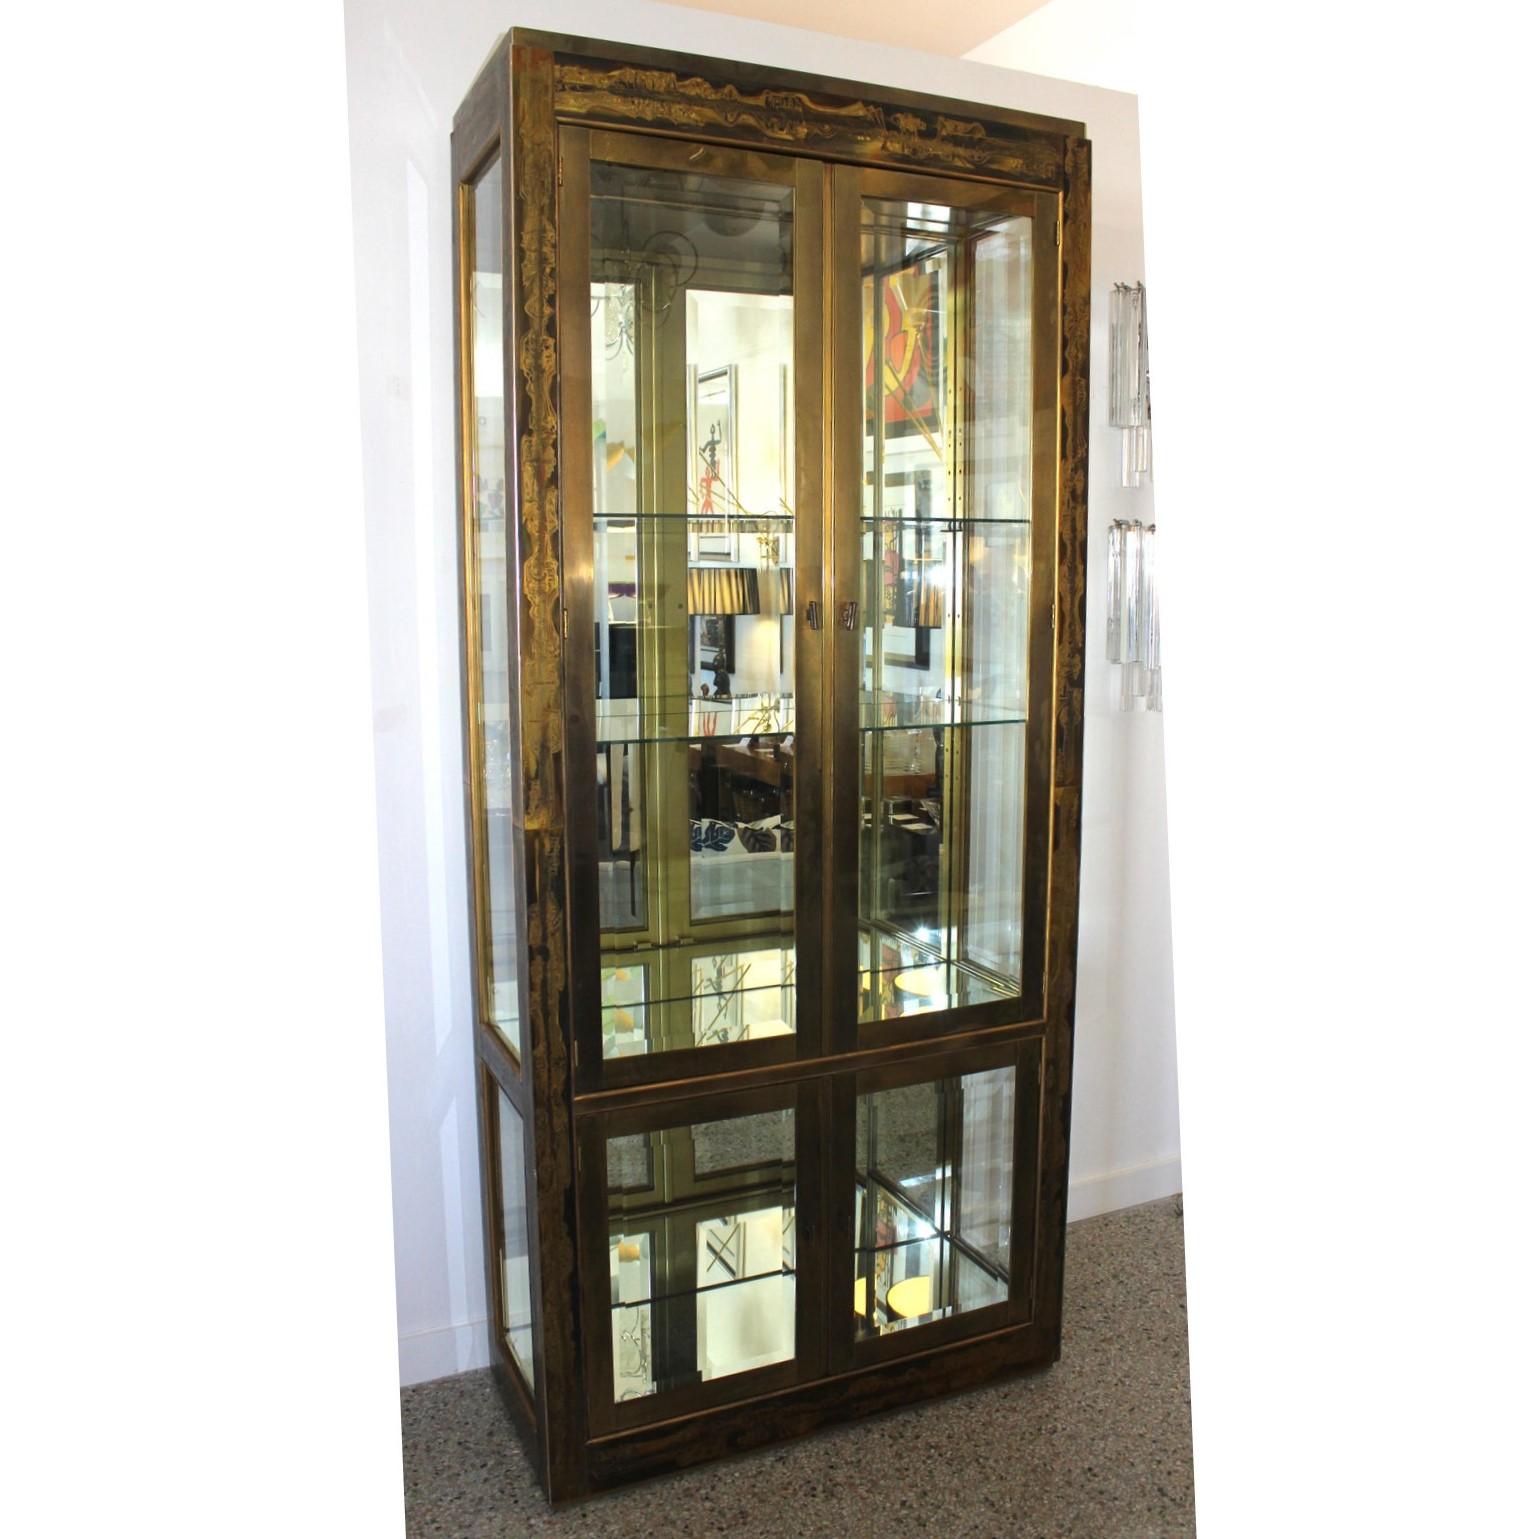 Vintage Bernhard Rohne for Mastercraft Display Cabinet in Anodized aluminum and brass - from a Palm Beach estate -- design of inside lights and mirrors enhances your collections.
The electric cord in the back has an on-off switch for the 2 inside